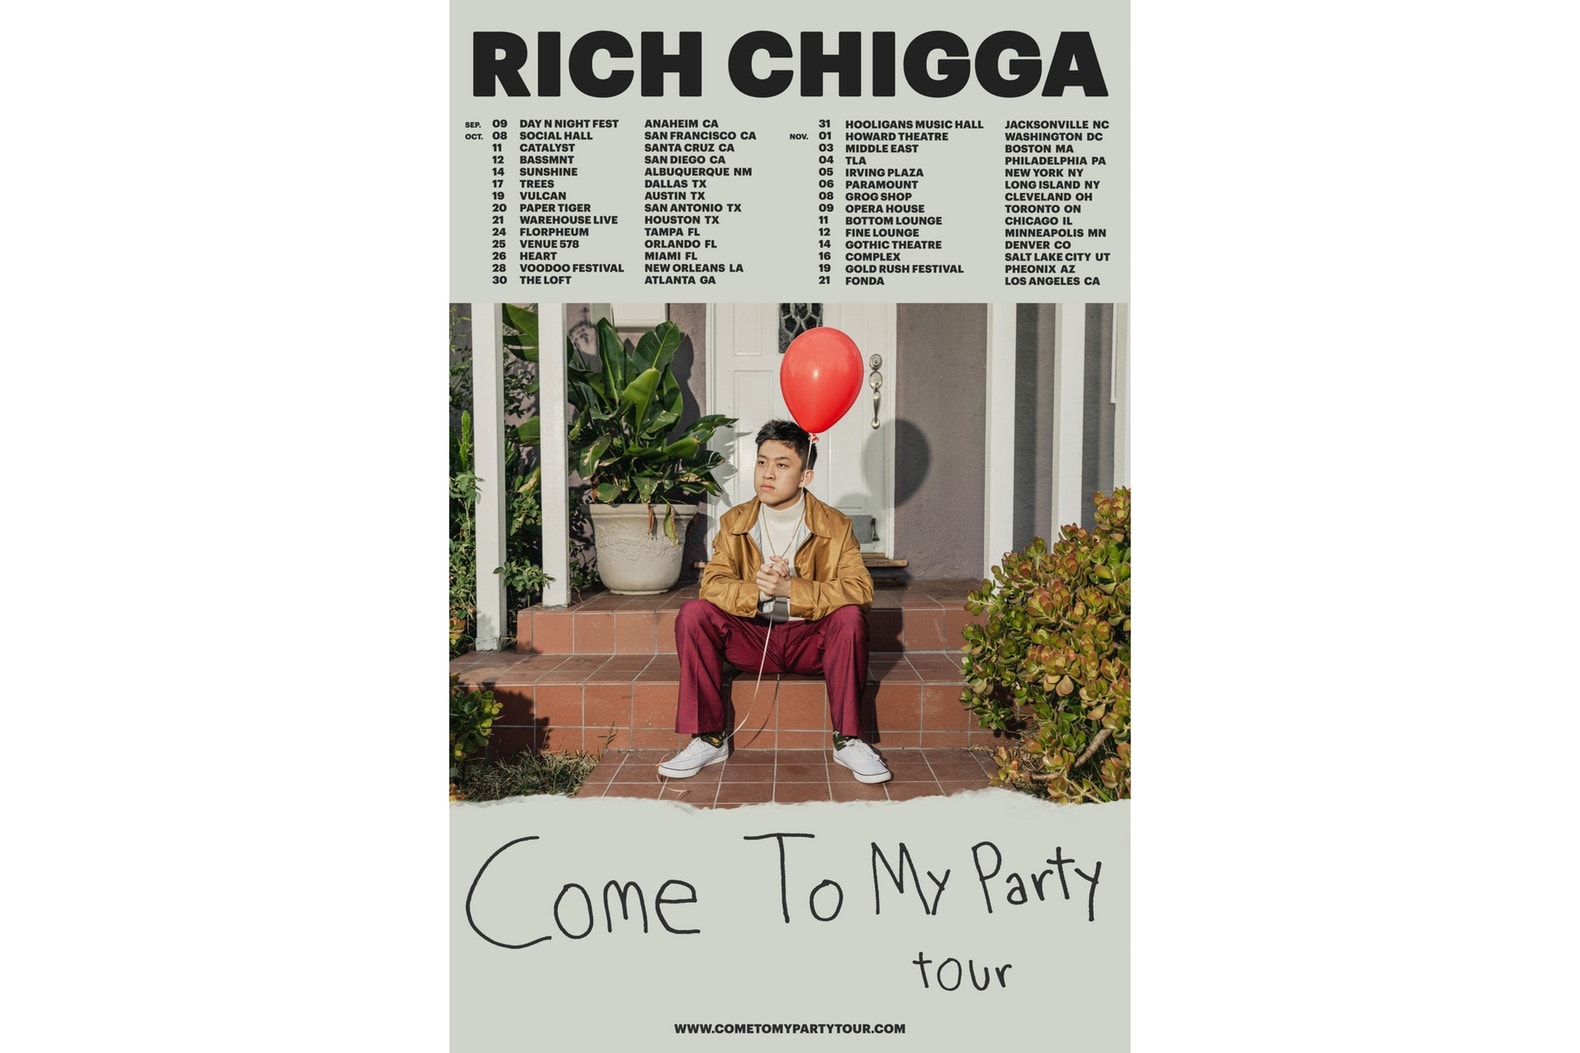 Rich Chigga "Come To My Party" Tour Announcement